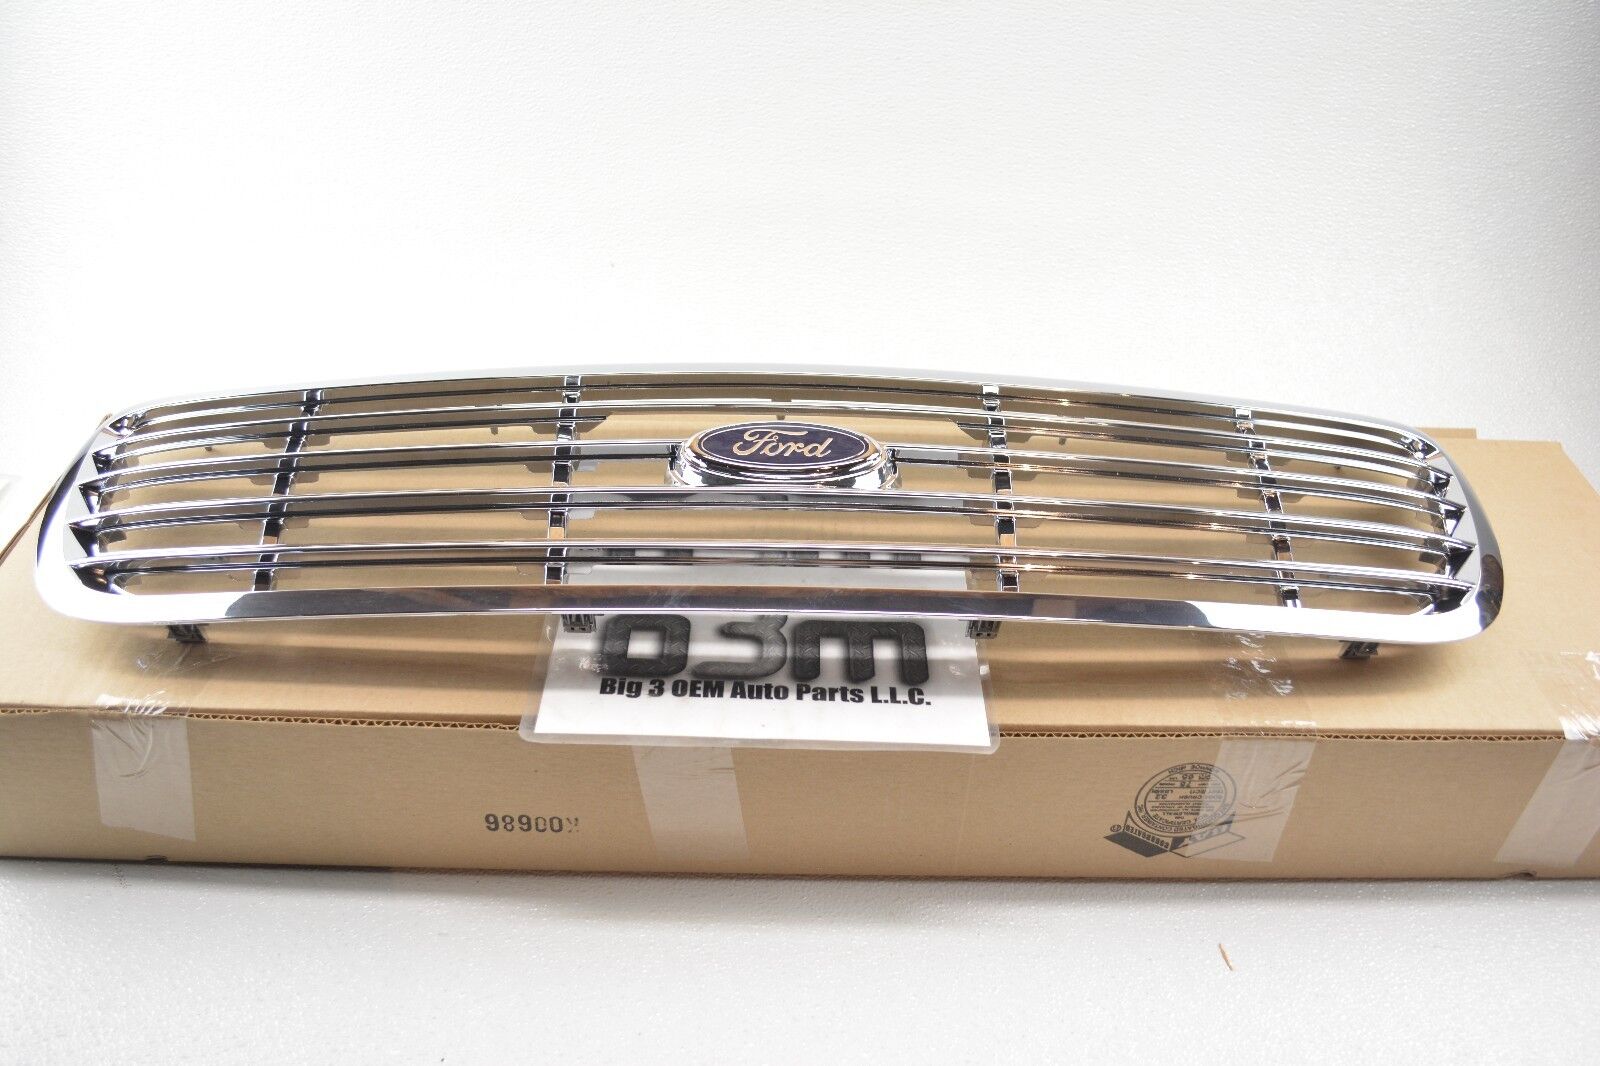 2001-2011 Ford Crown Victoria Front Hood Grille Chrome new OEM 6W7Z-8200-BA